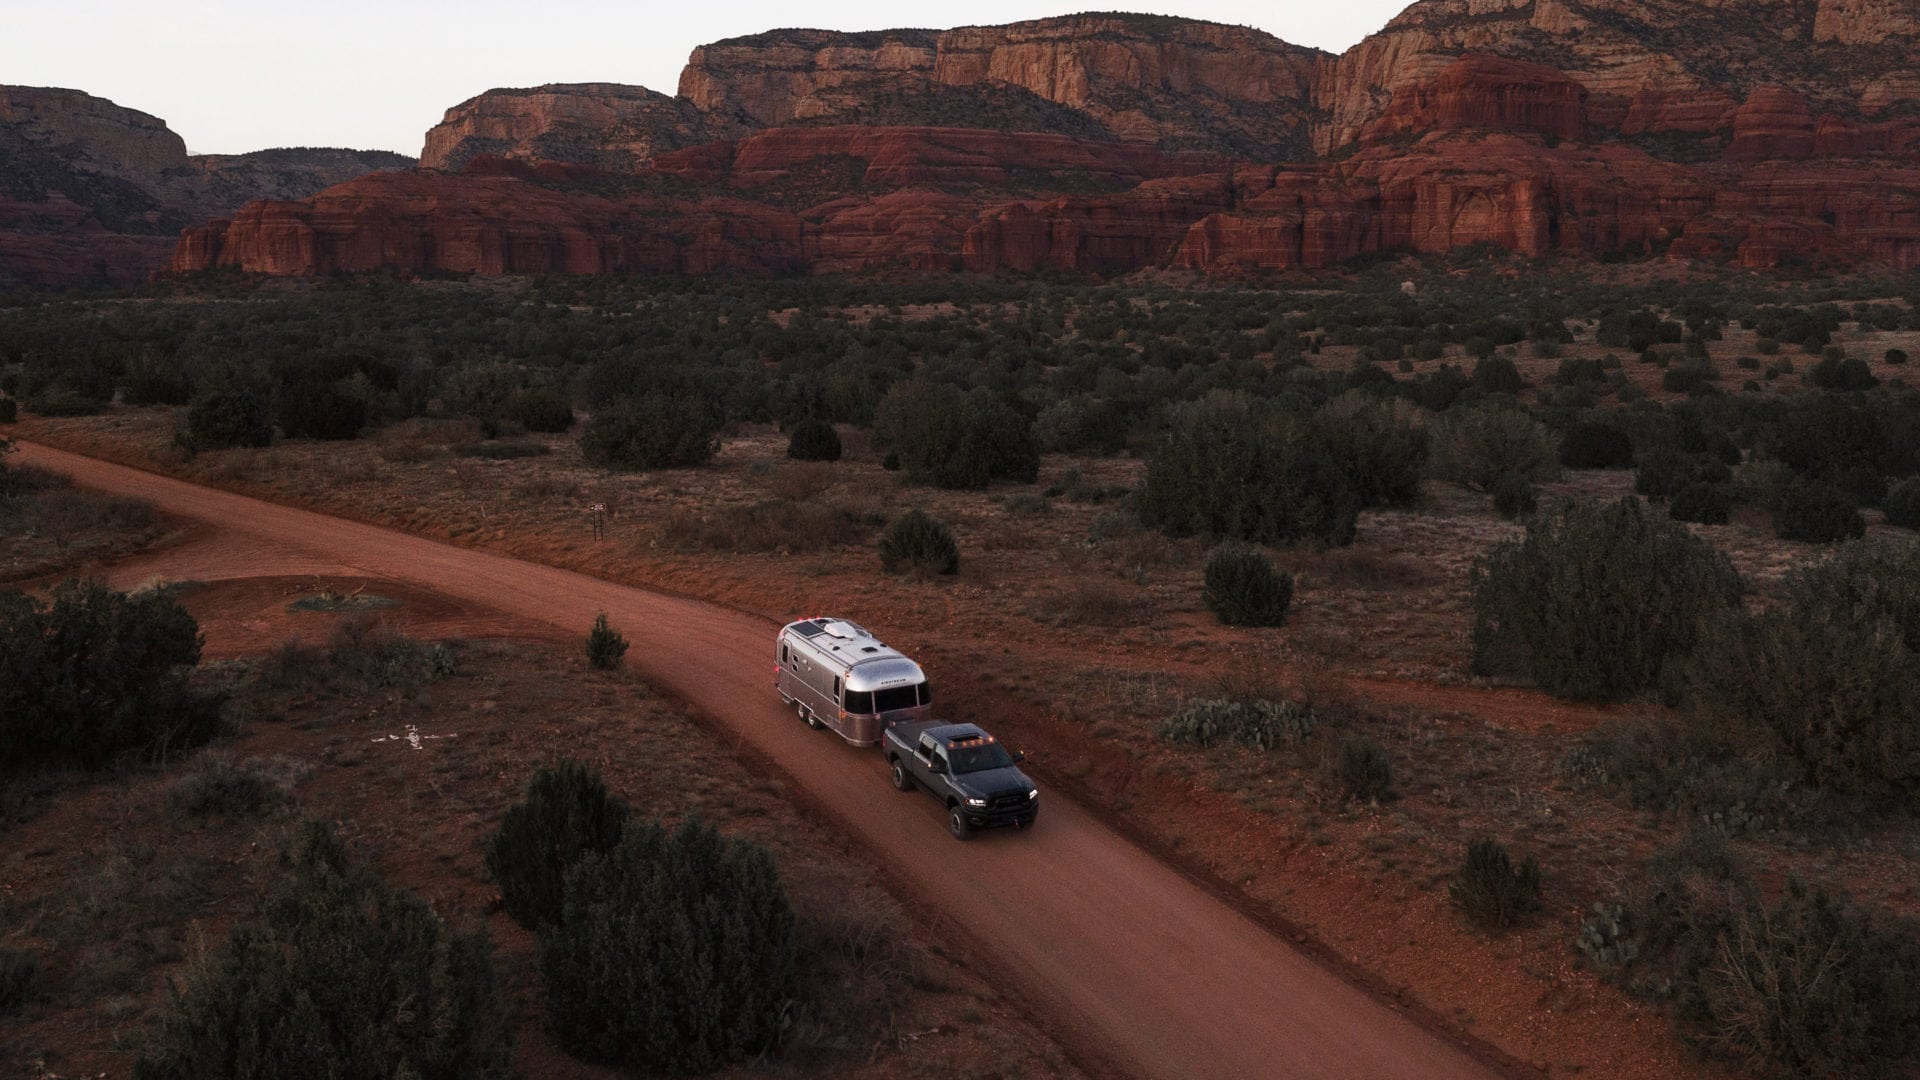 More road trips this summer made possible by Ram Trucks